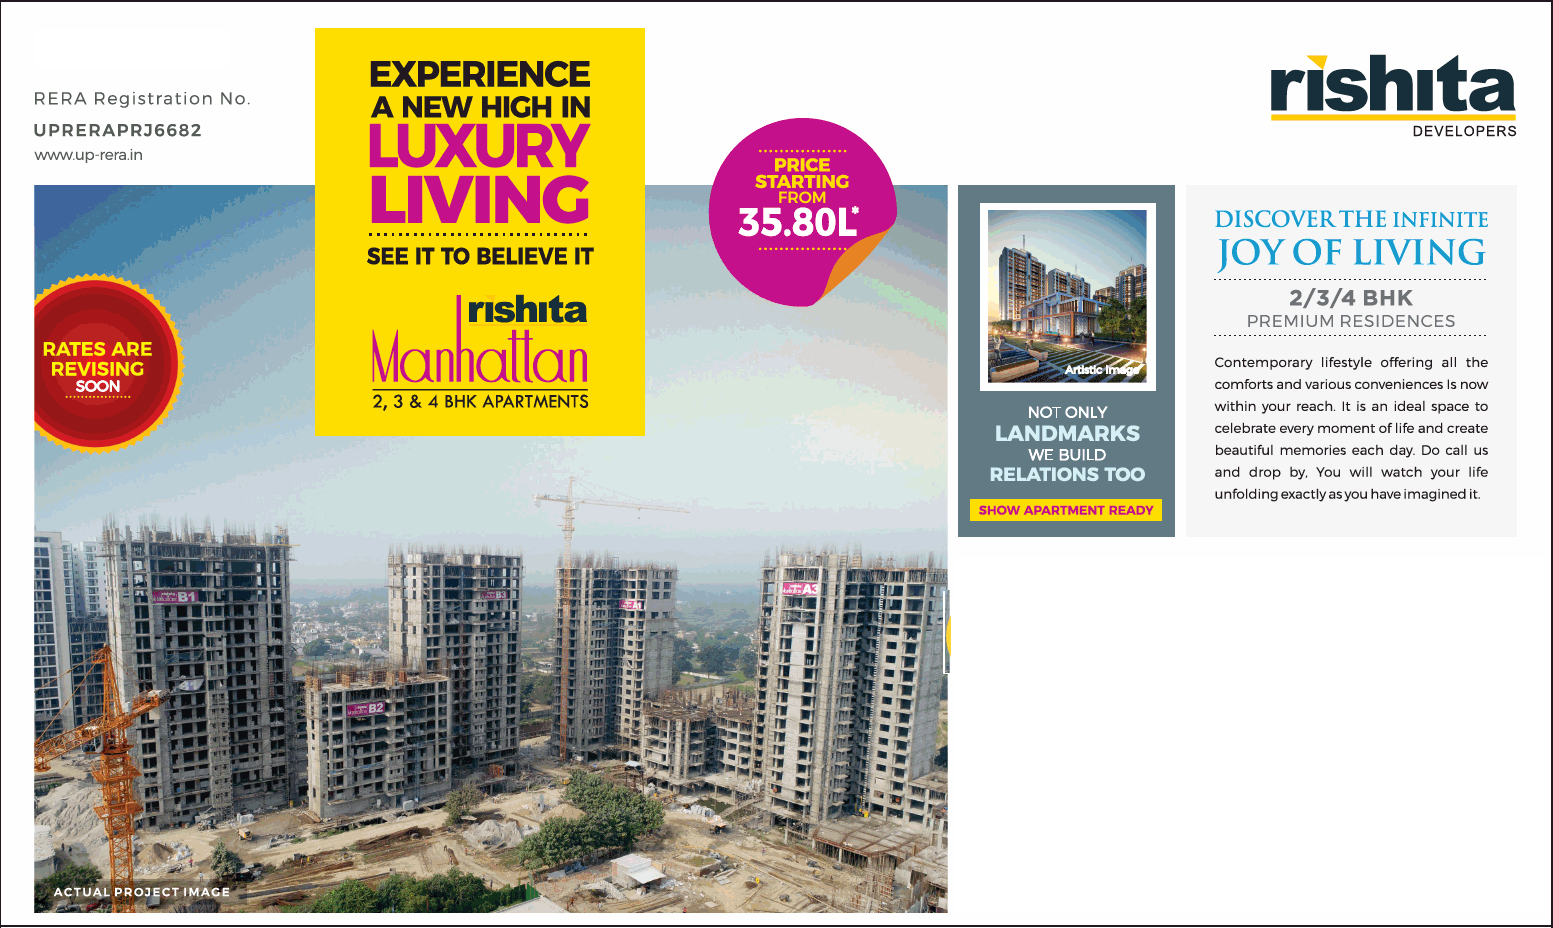 Discover the infinite joy of living at Rishita Manhattan in Lucknow Update